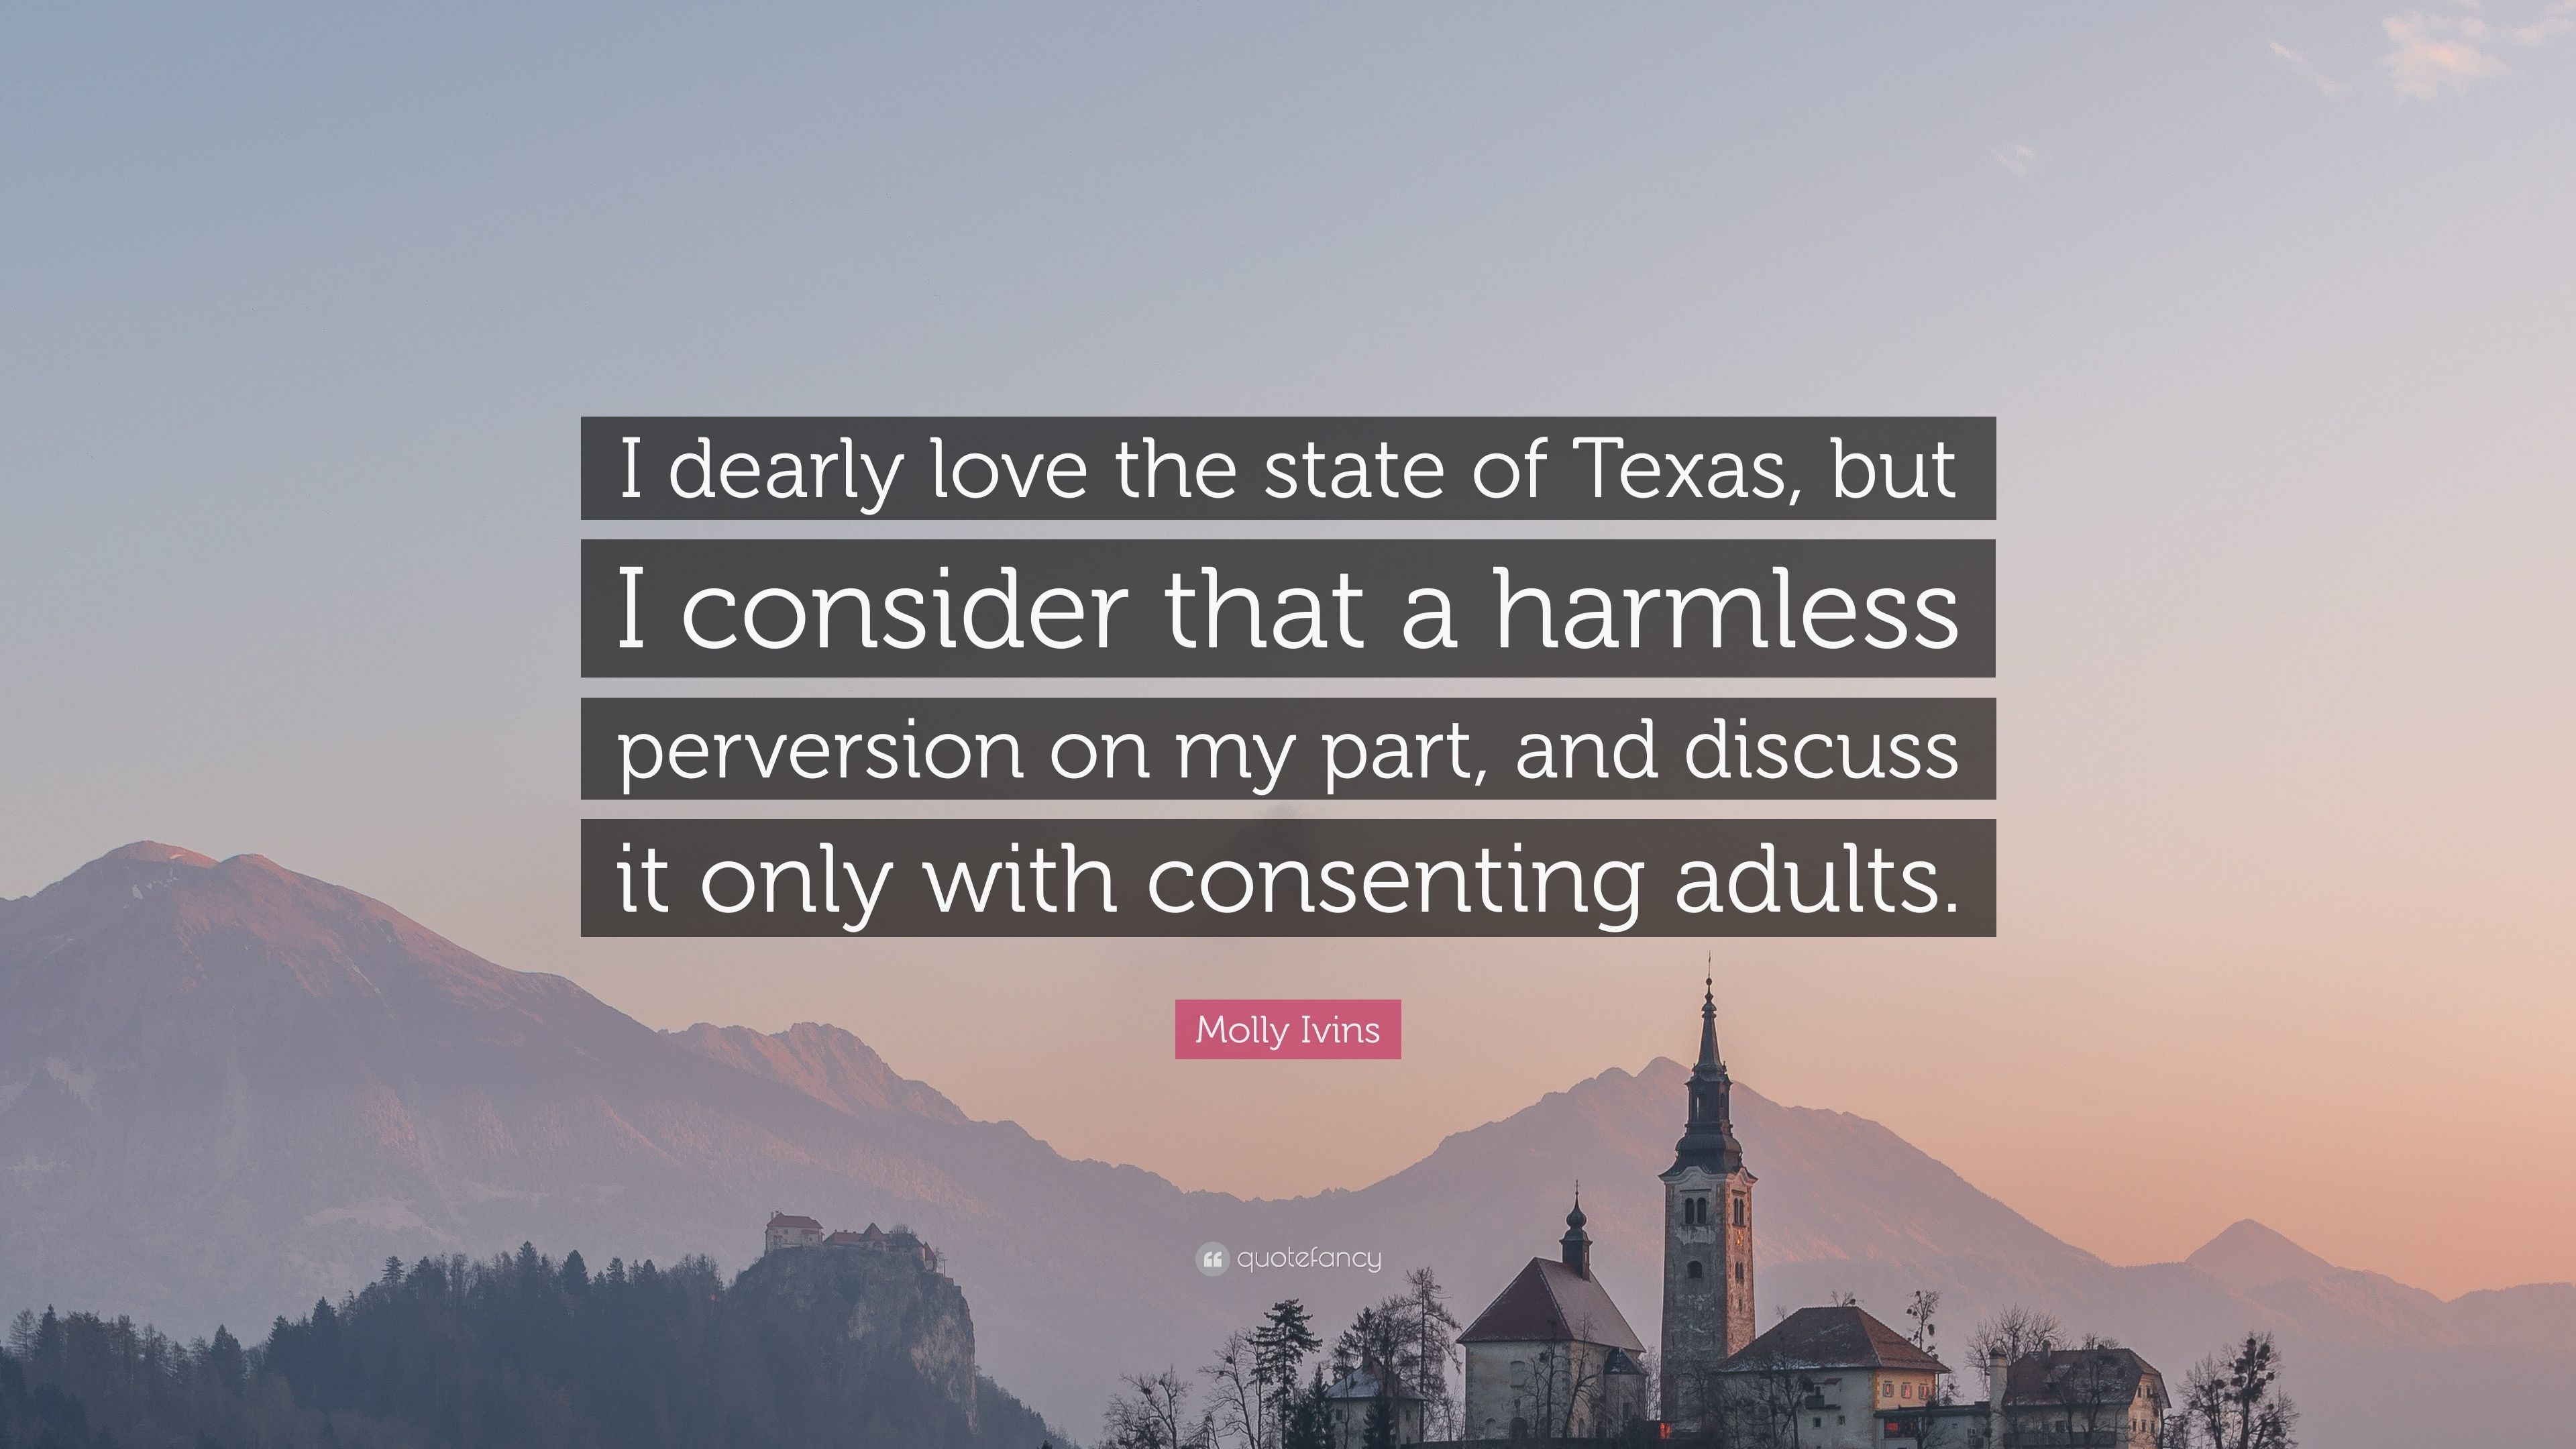 3840x2160 Molly Ivins Quote: “I dearly love the state of Texas, but I consider